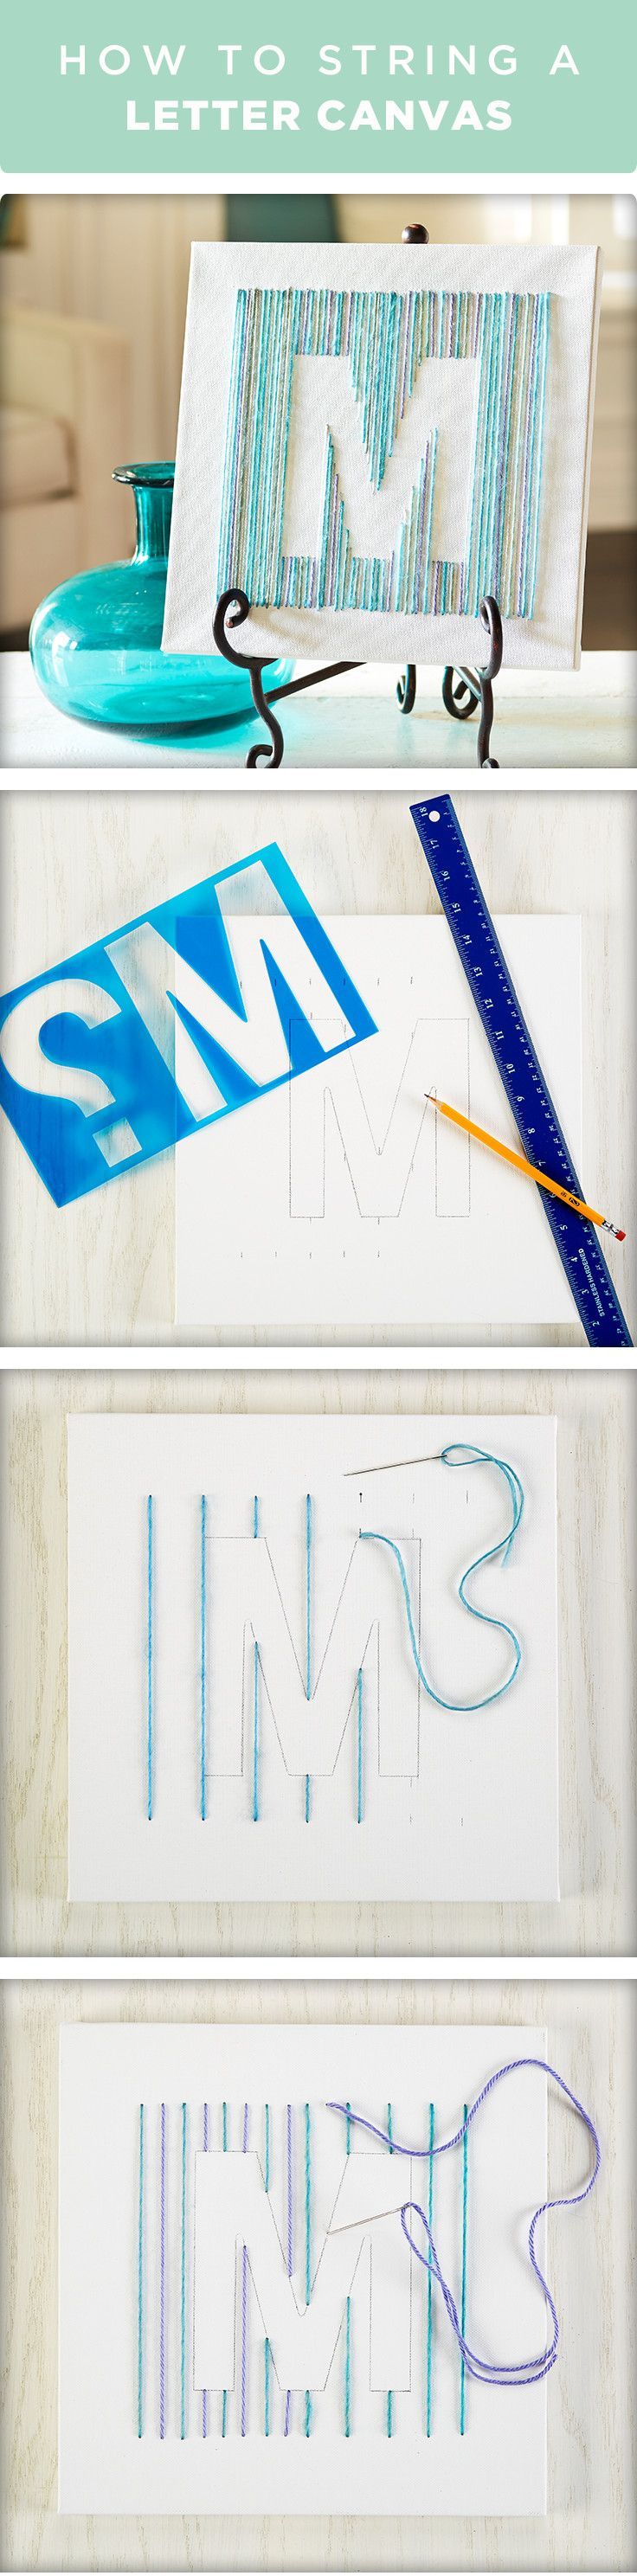 Learn how to string a letter on canvas. Outline the letter using a stencil, create